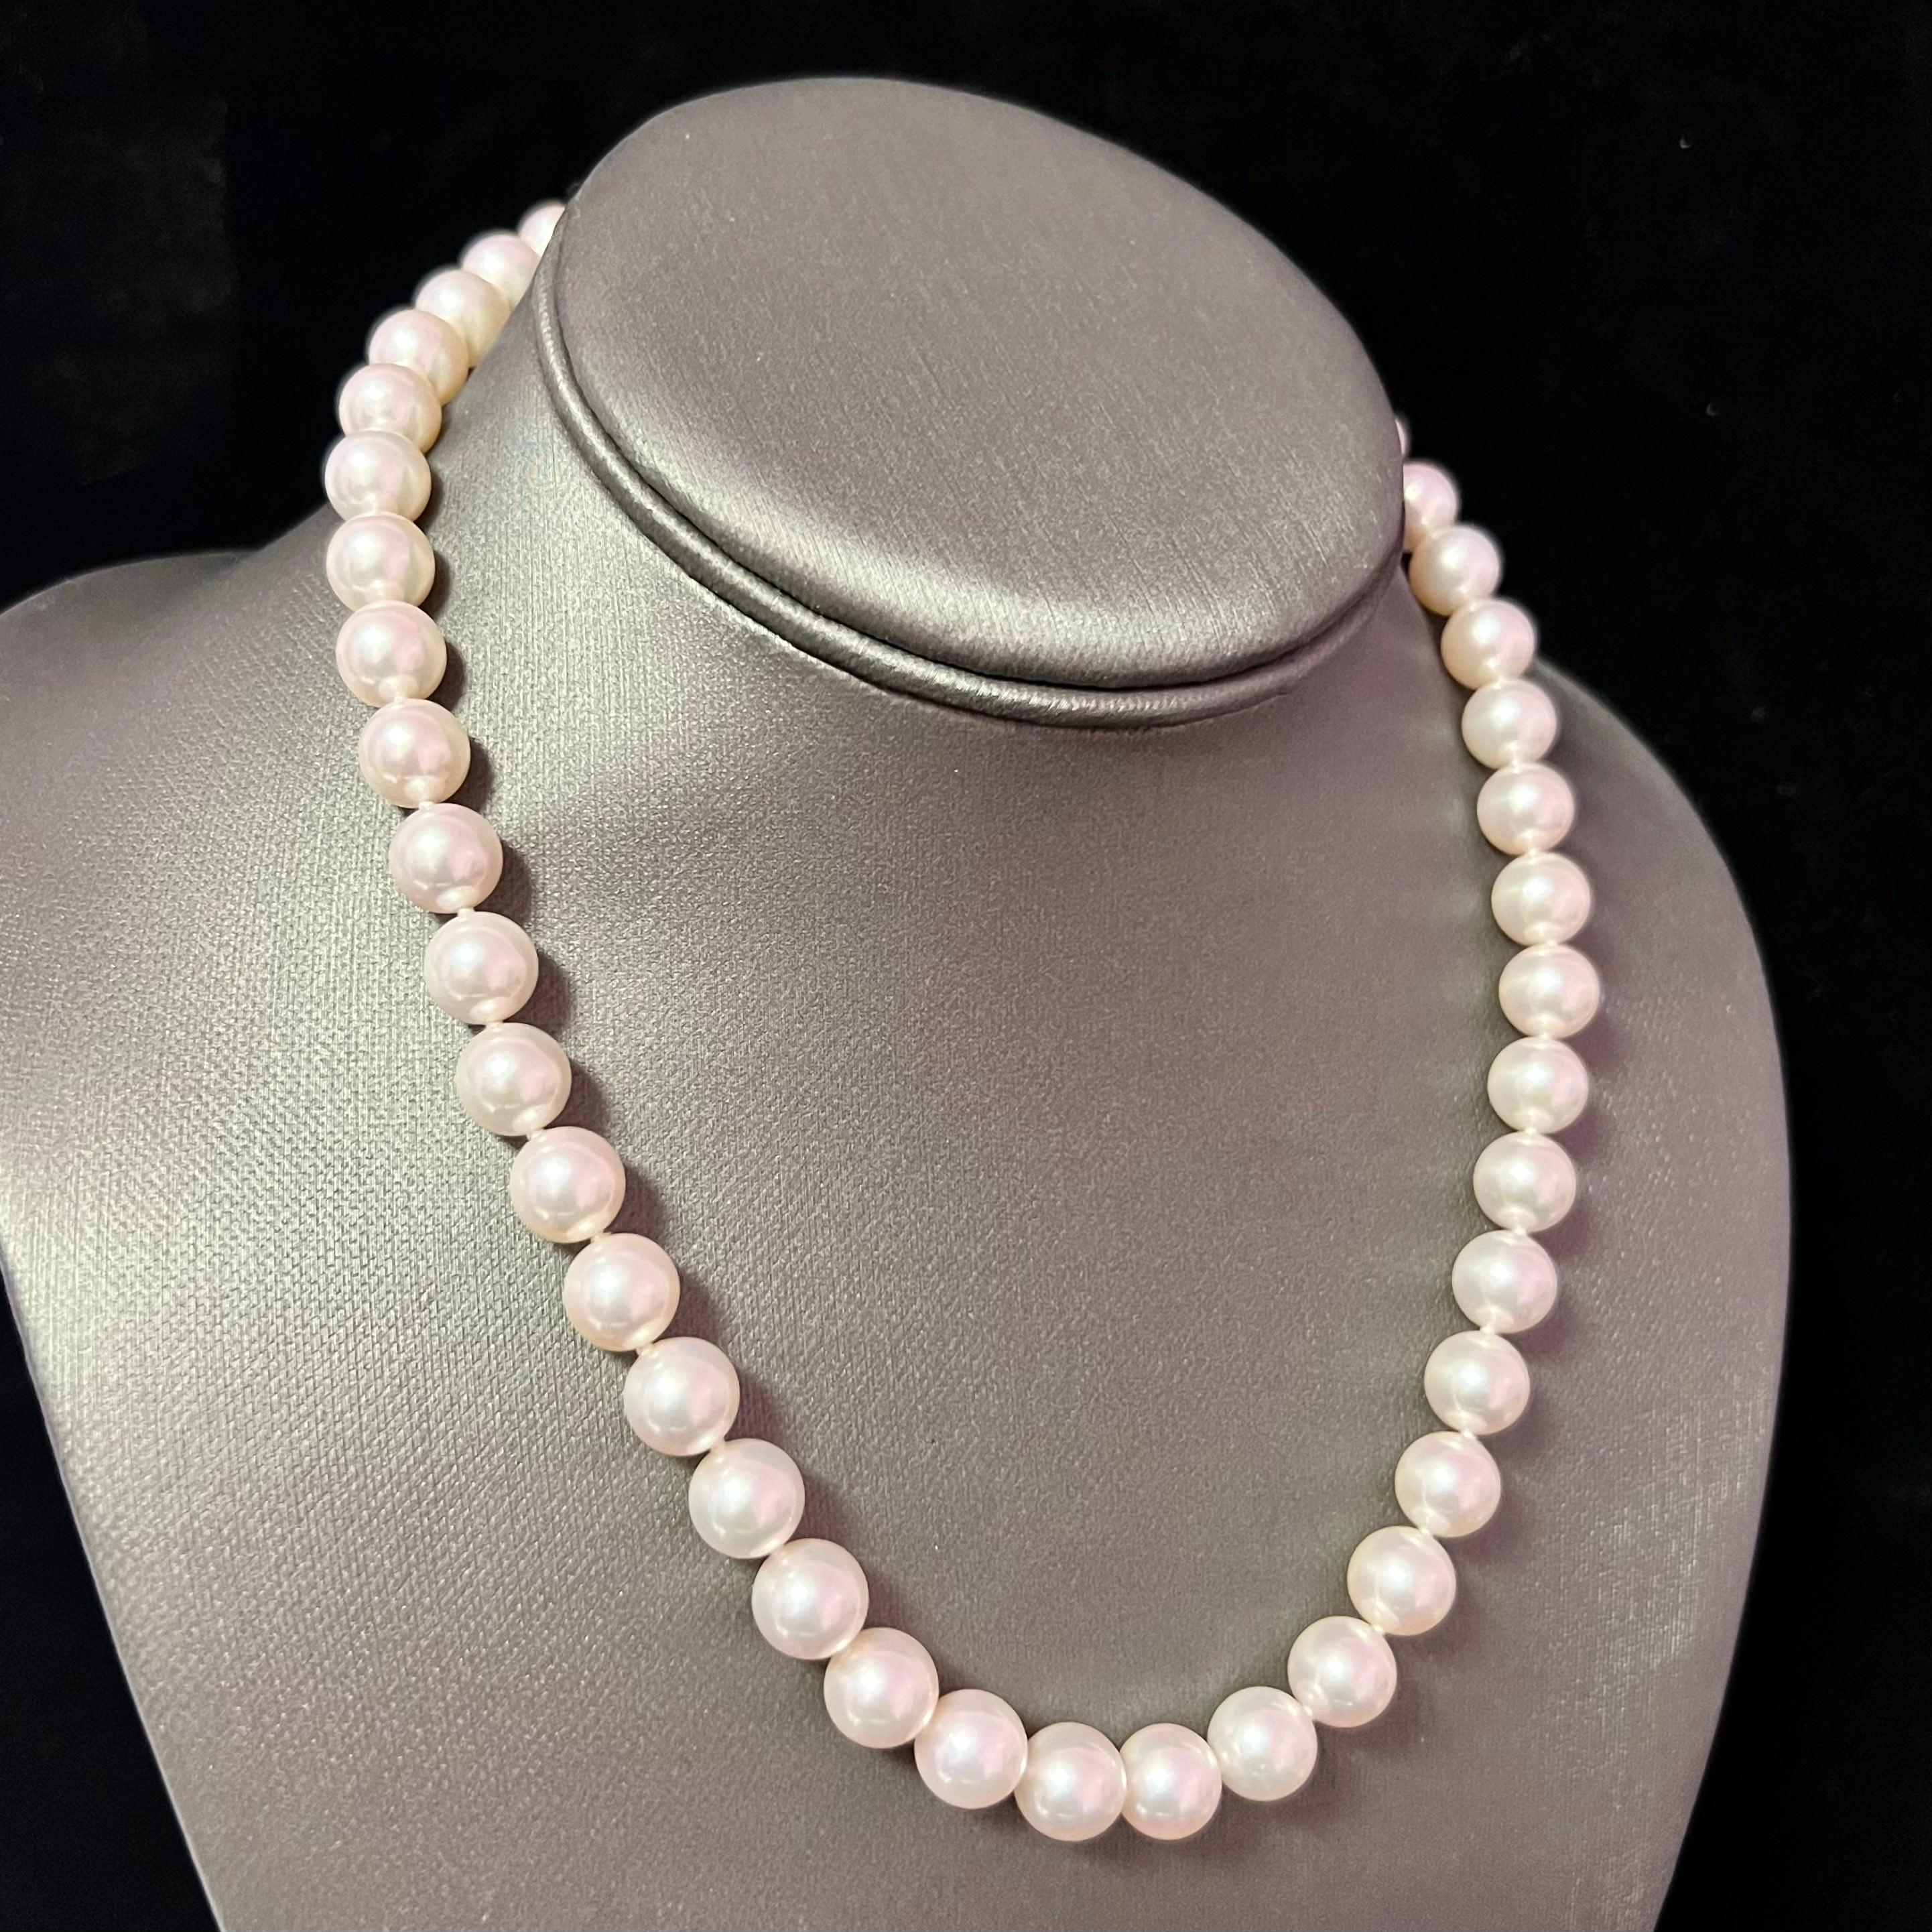 Mikimoto Estate Akoya Pearl Necklace 18k Gold 9.5 mm Certified M35435 In Good Condition For Sale In Brooklyn, NY